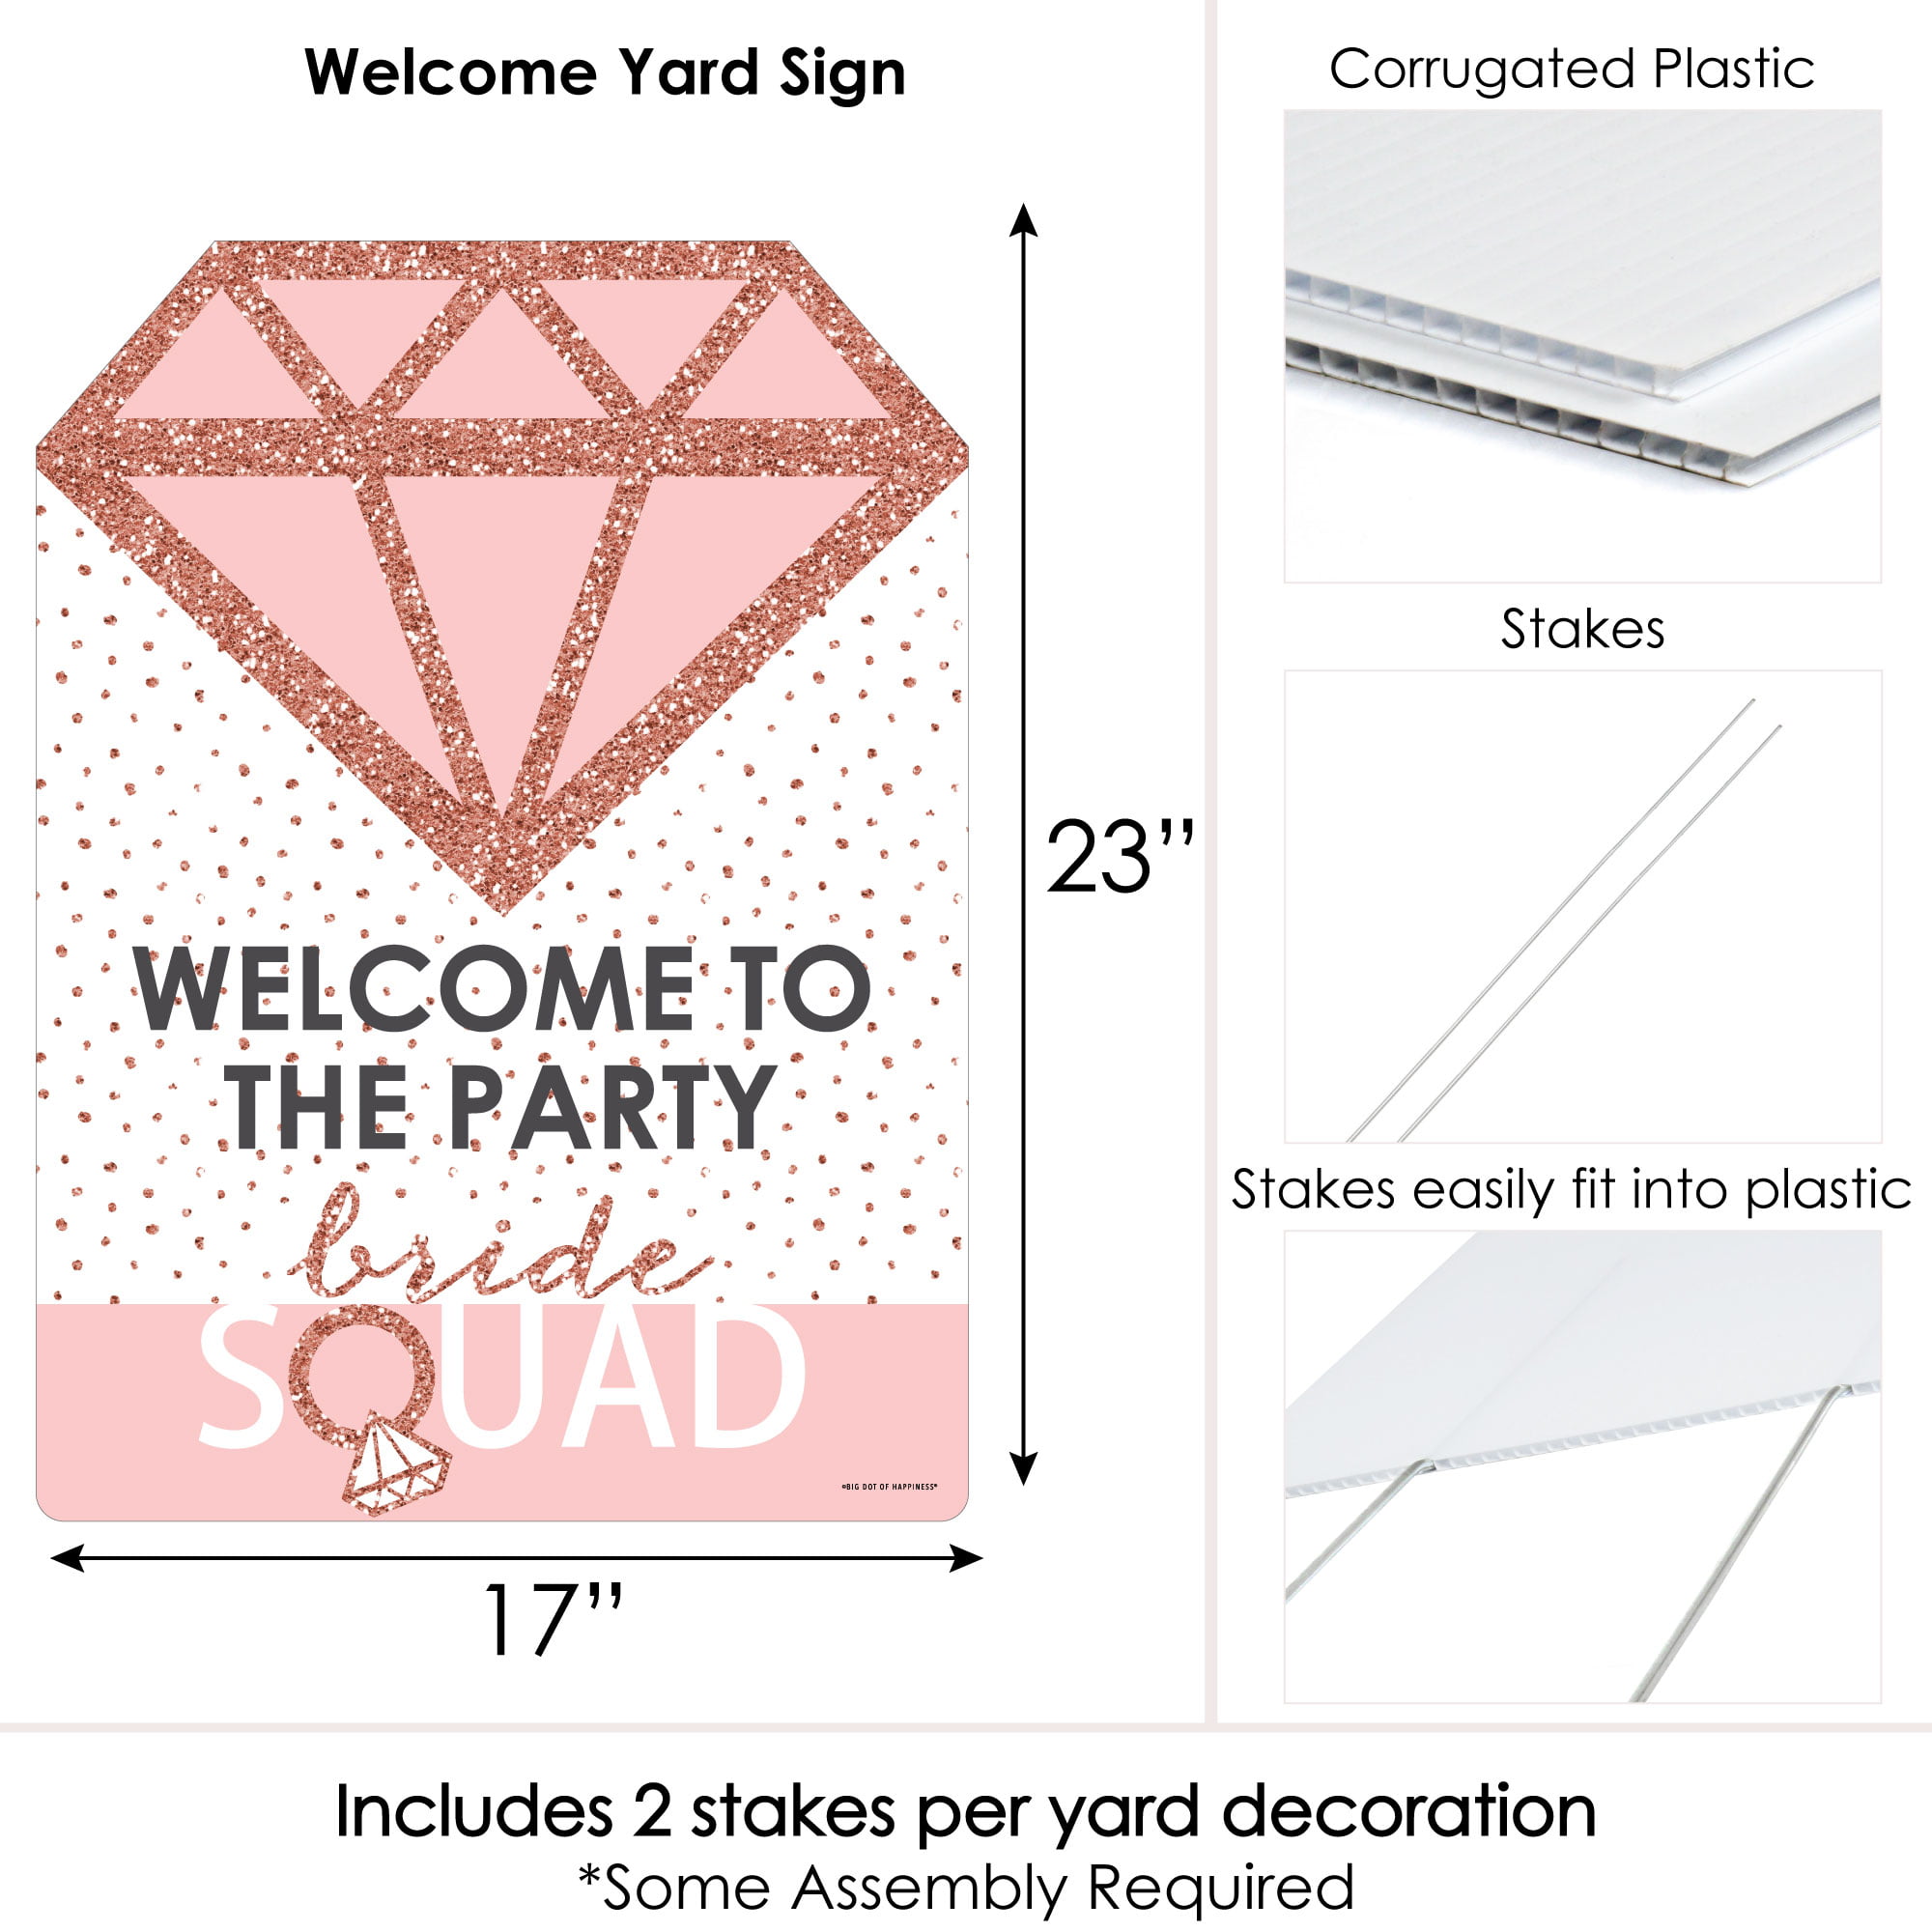 Big Dot Of Happiness Bride Squad - Paper Straw Decor - Rose Gold